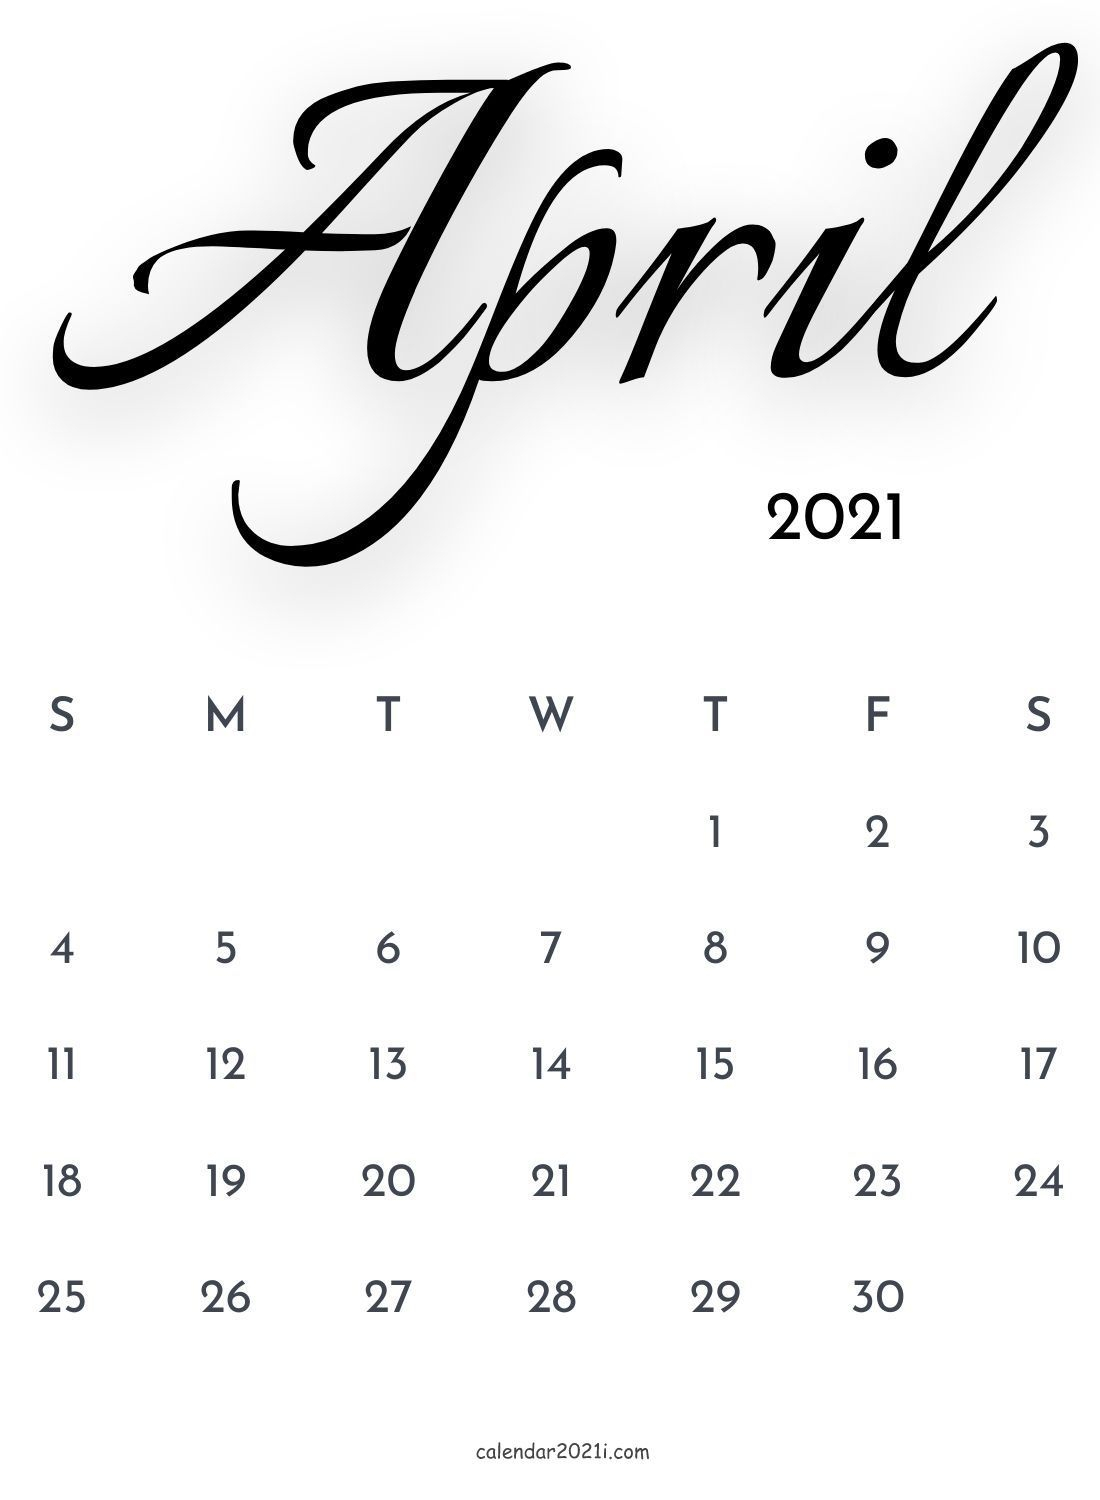 April 2021 Calligraphy Calendar Free Download In 2020 | Free